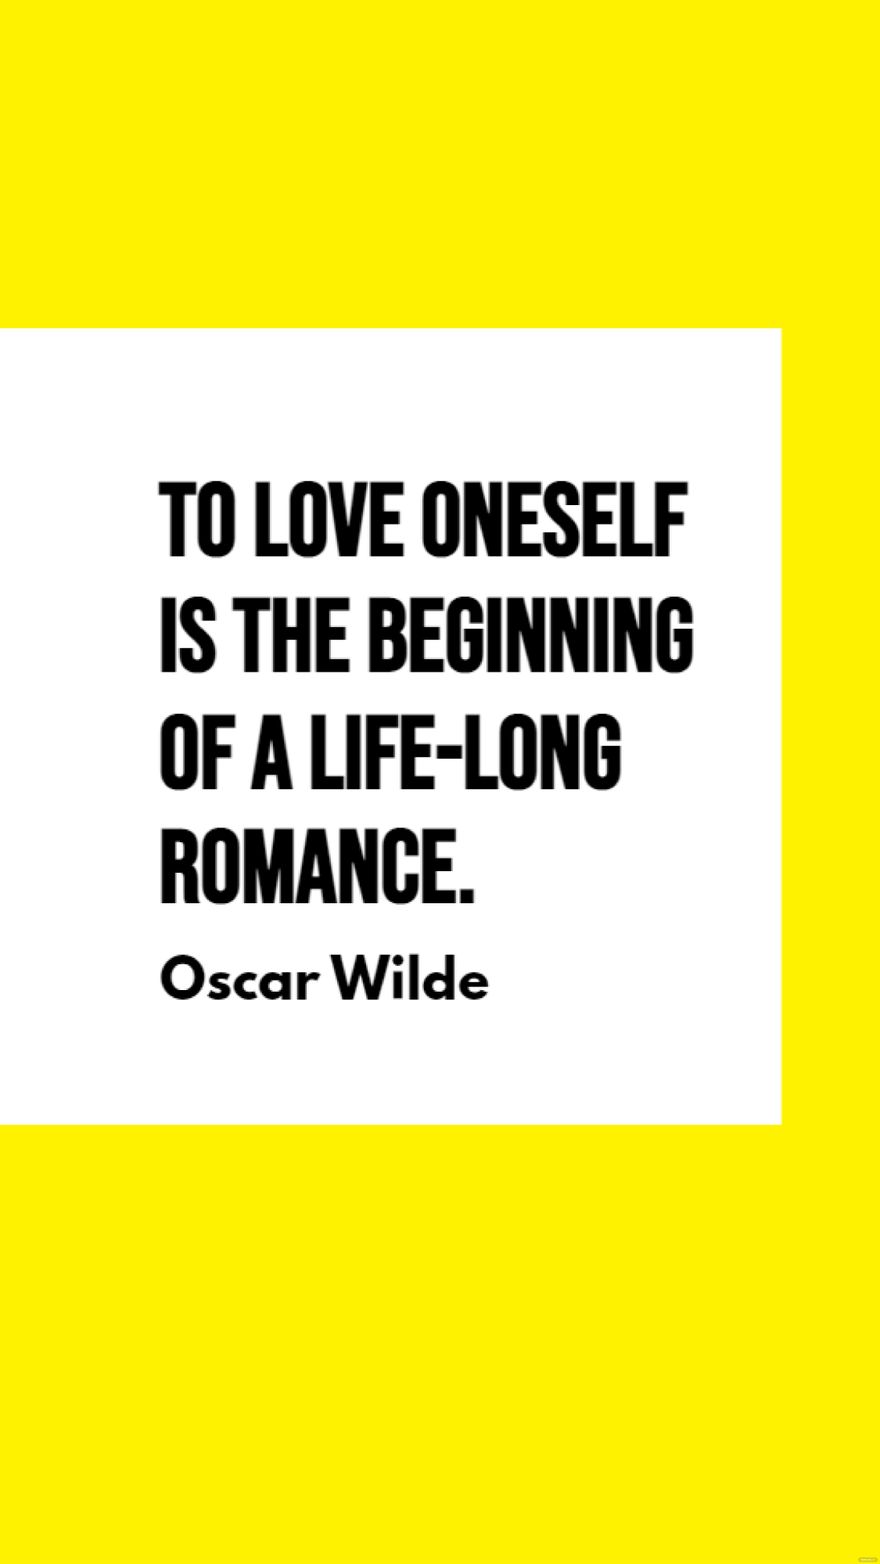 Oscar Wilde - To love oneself is the beginning of a life-long romance.